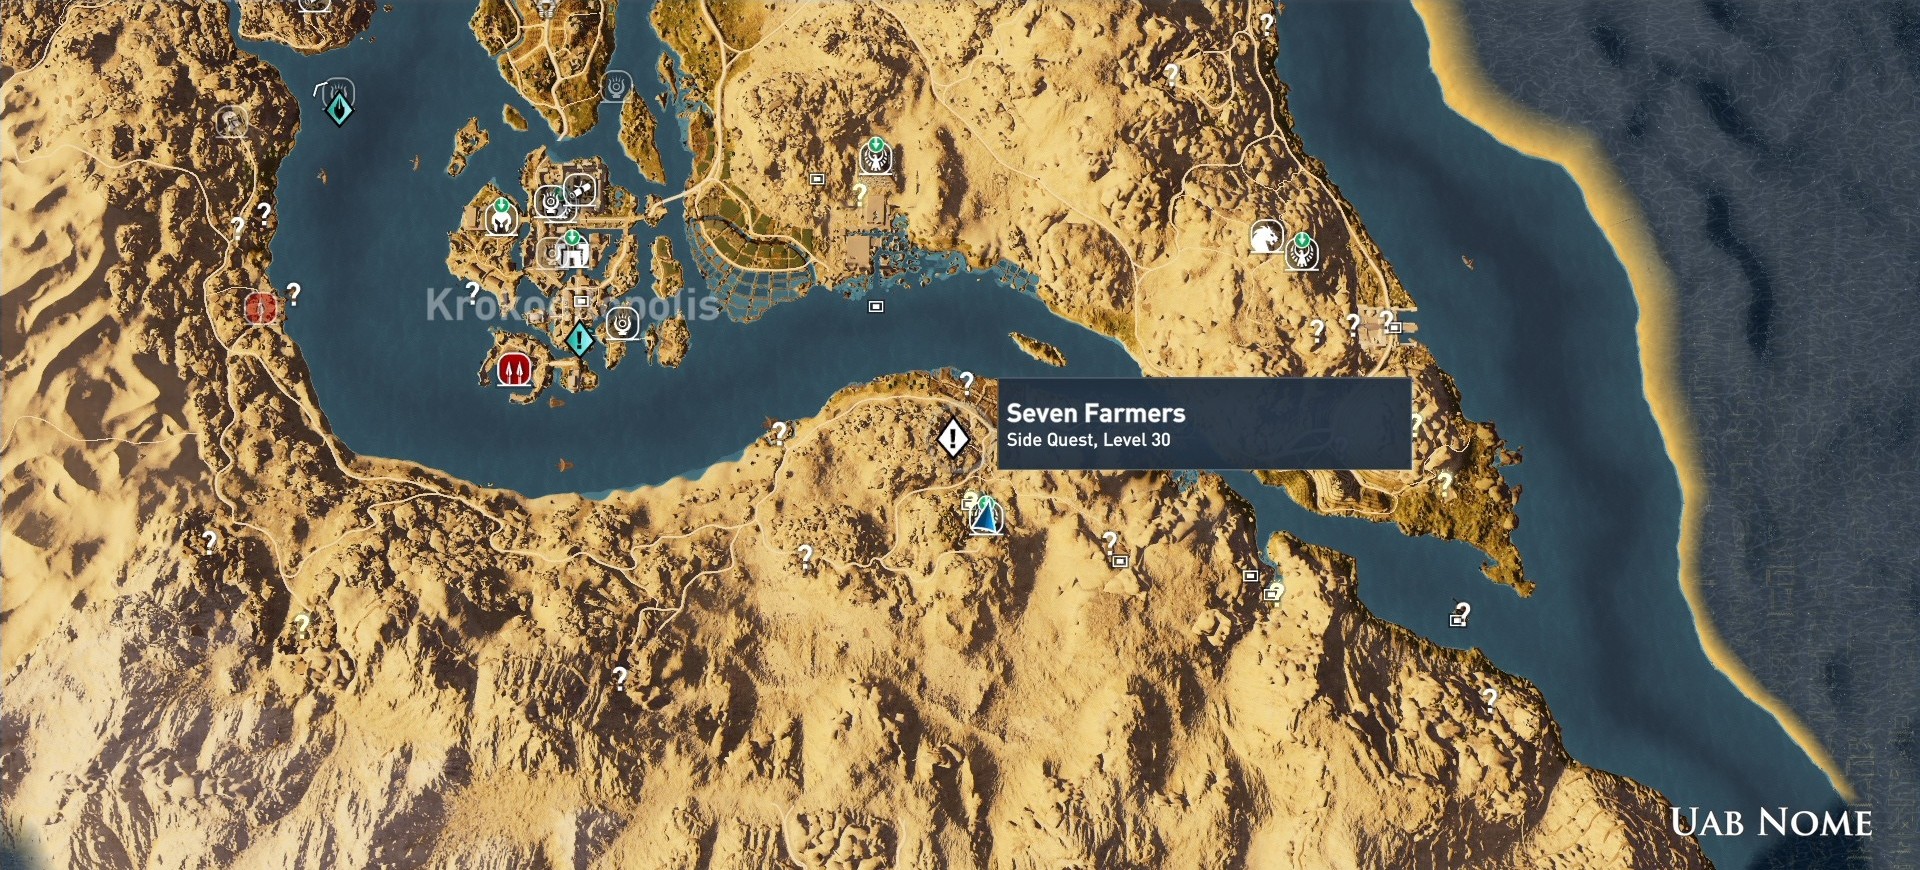 Assassin's Creed Origins Trophy Guide •